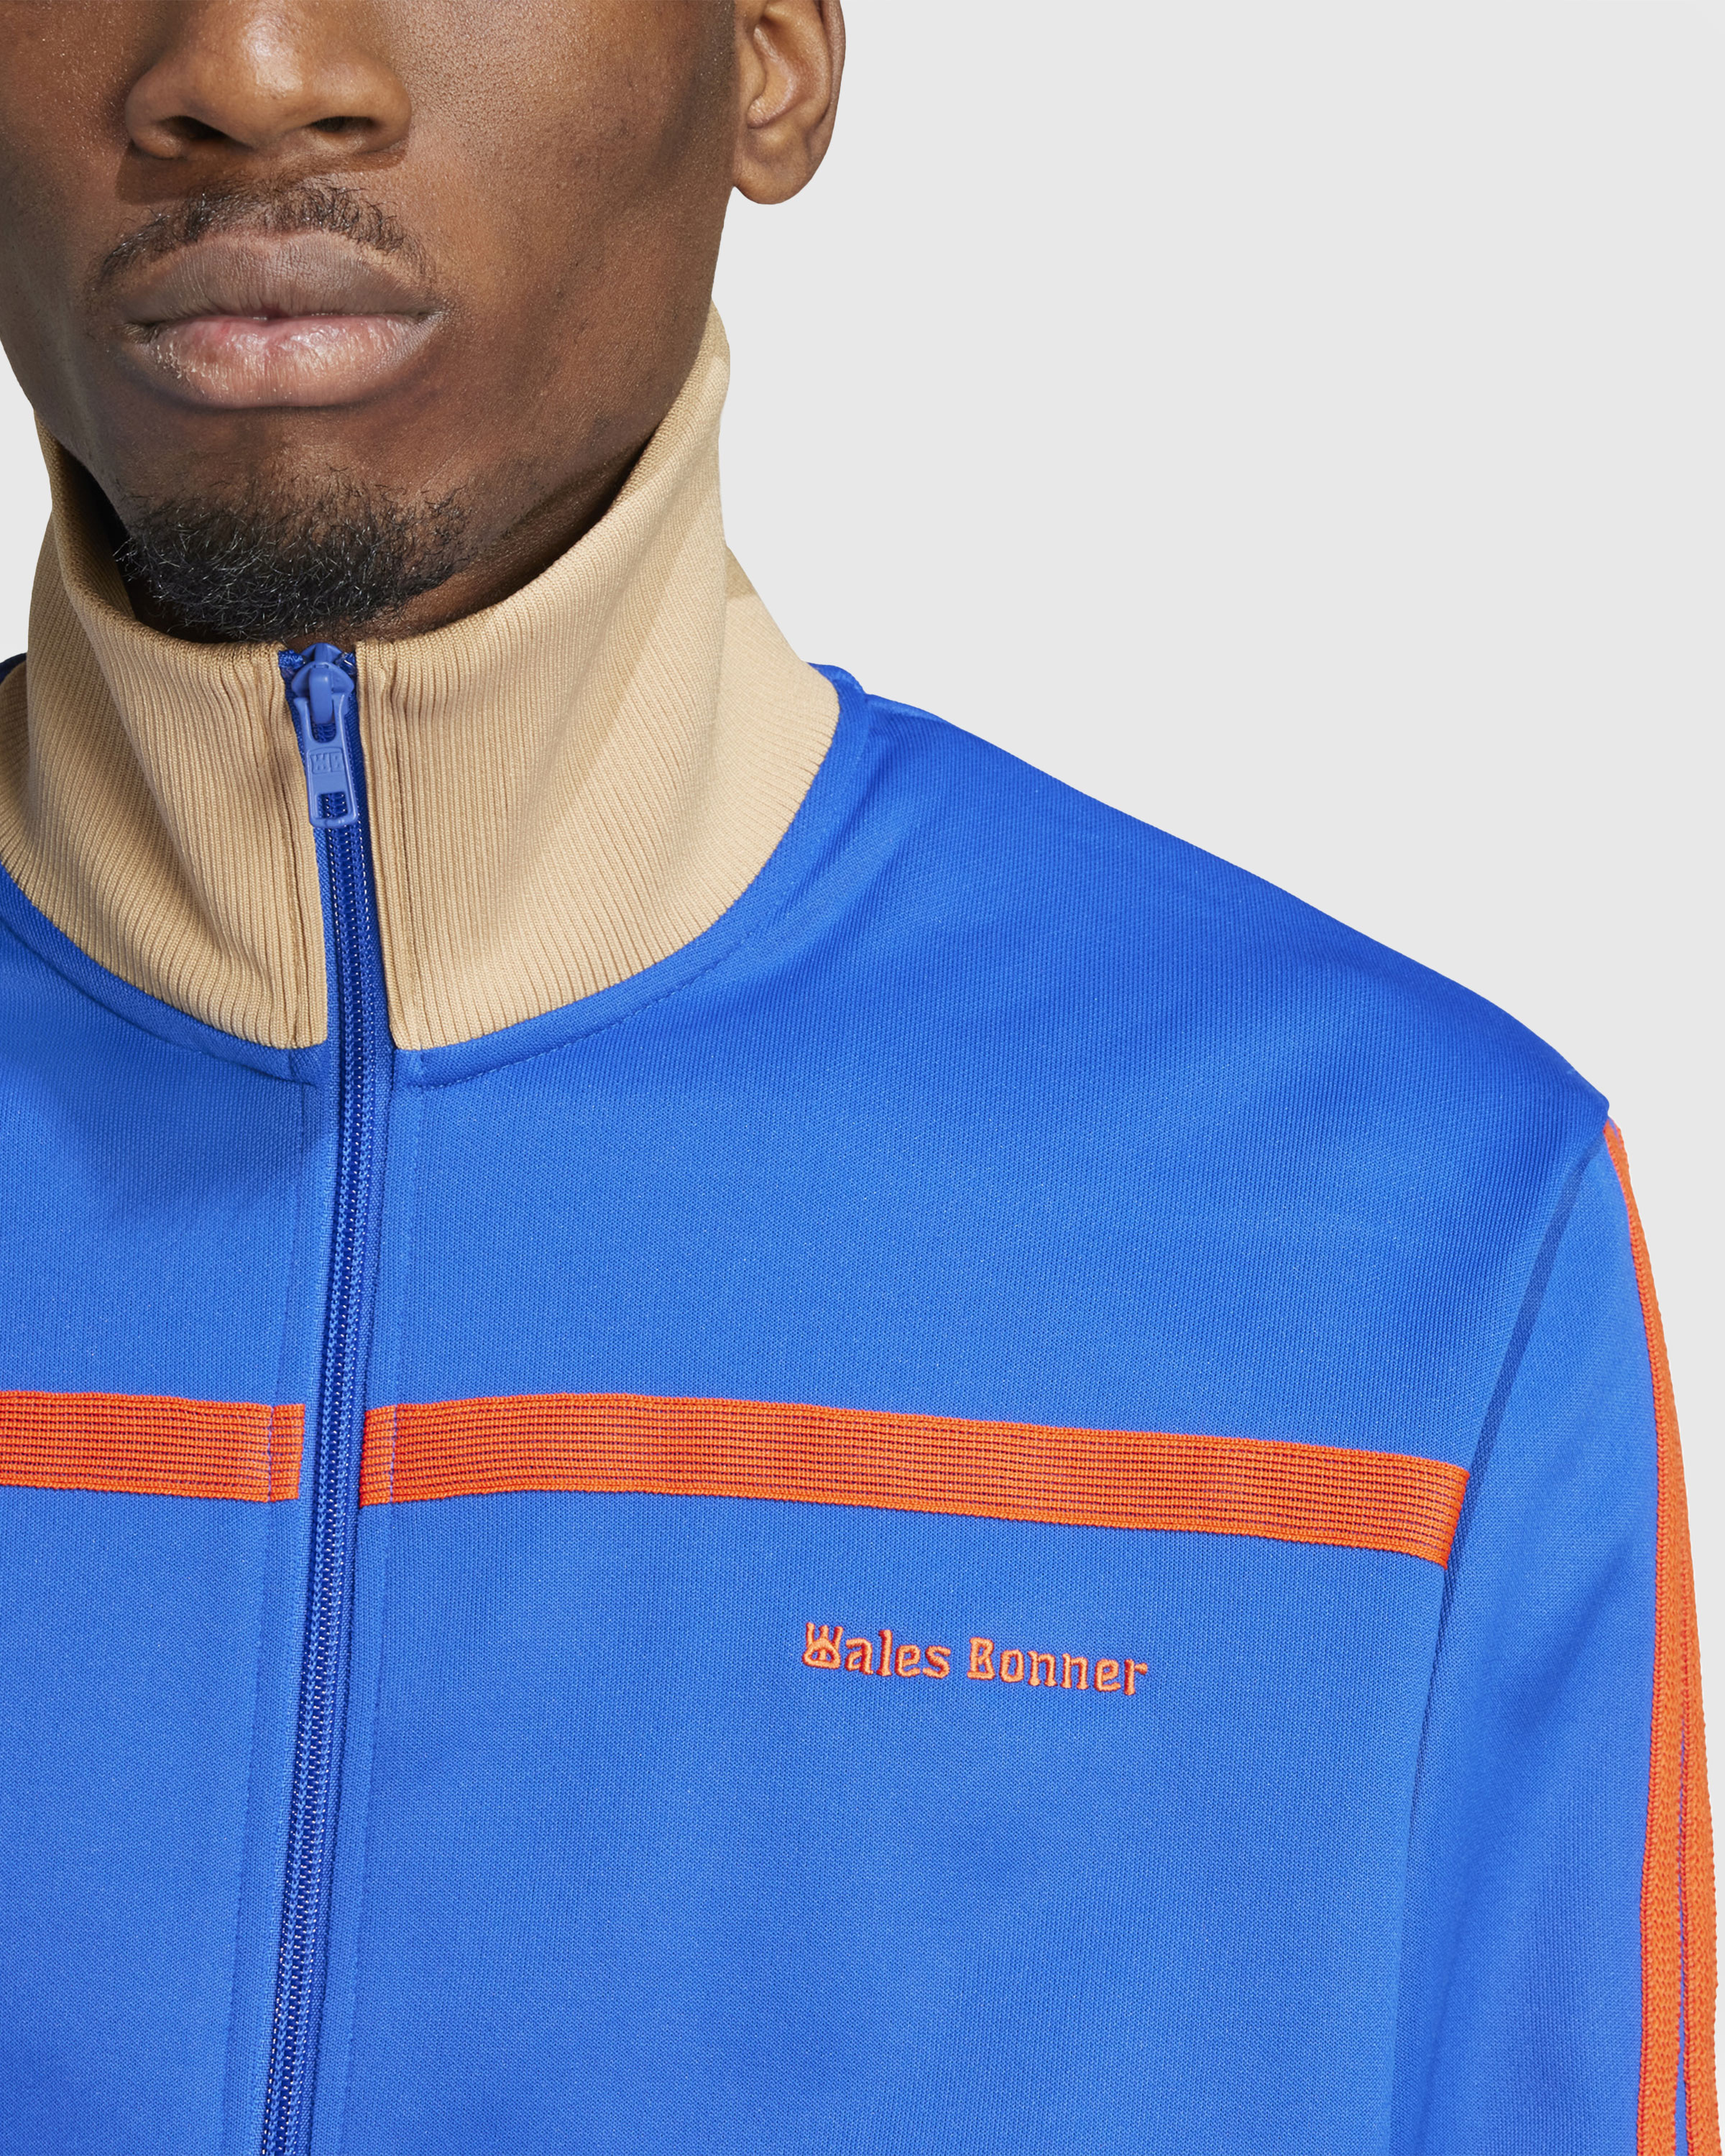 Adidas x Wales Bonner – Jersey Track Top Royal Blue - Track Jackets - Blue - Image 6